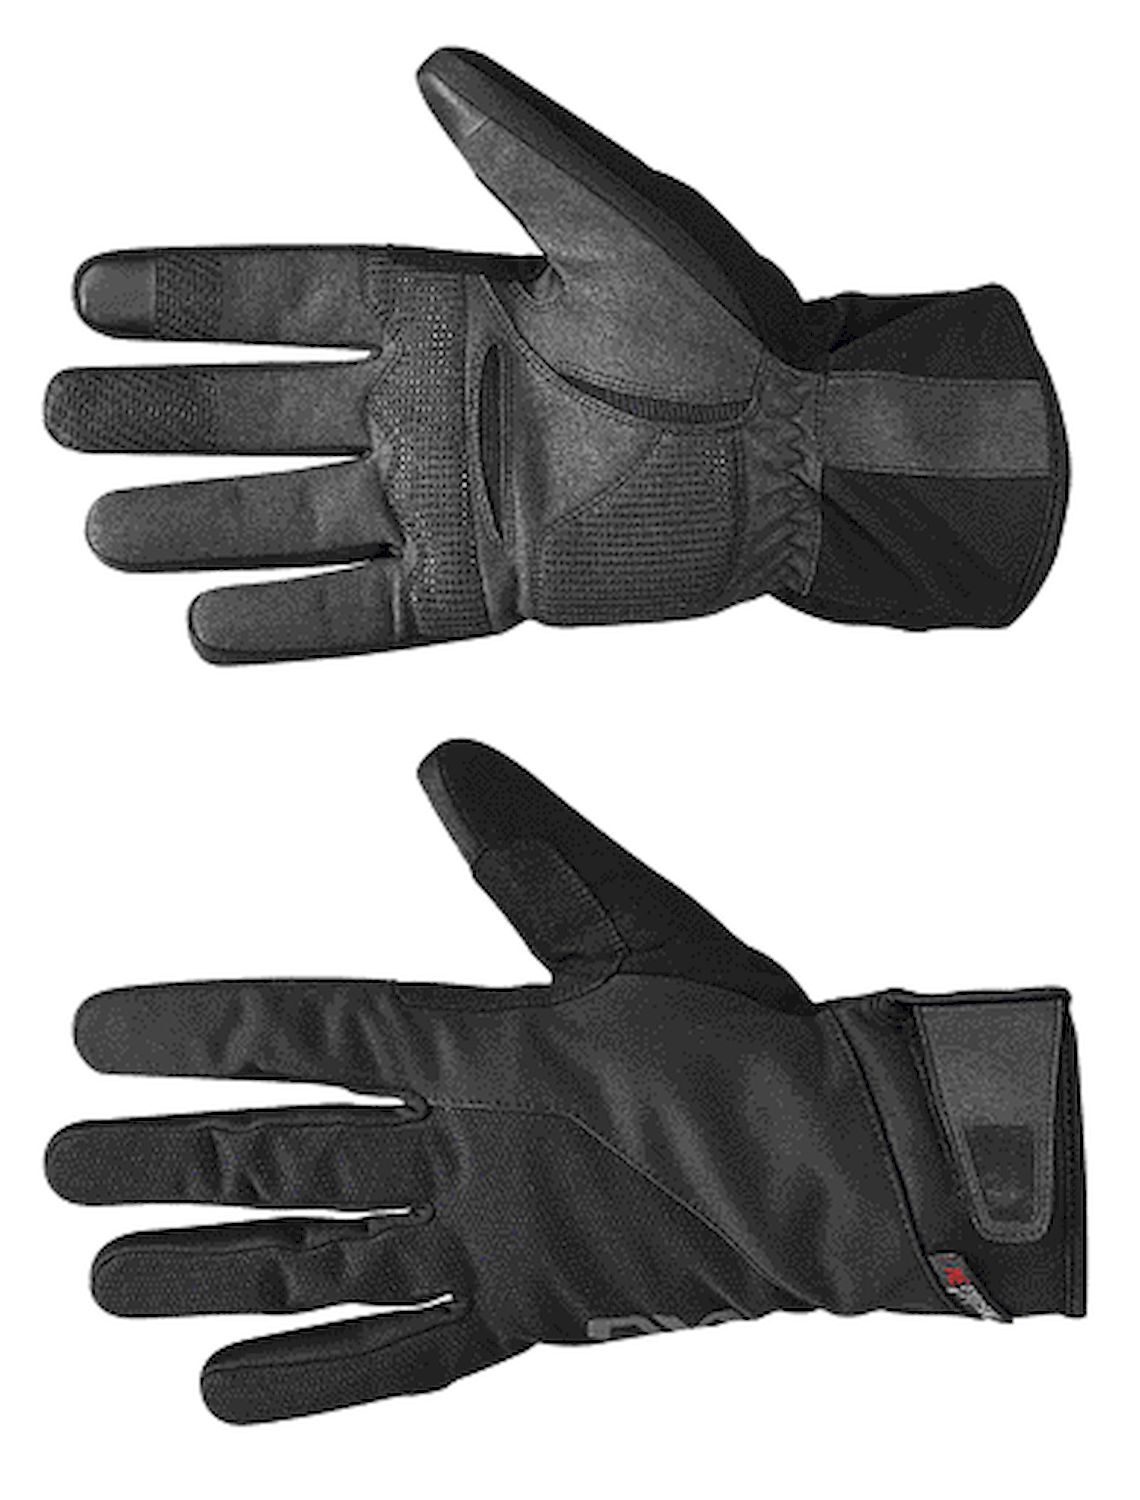 Northwave Fast Arctic Glove - Cycling gloves - Men's